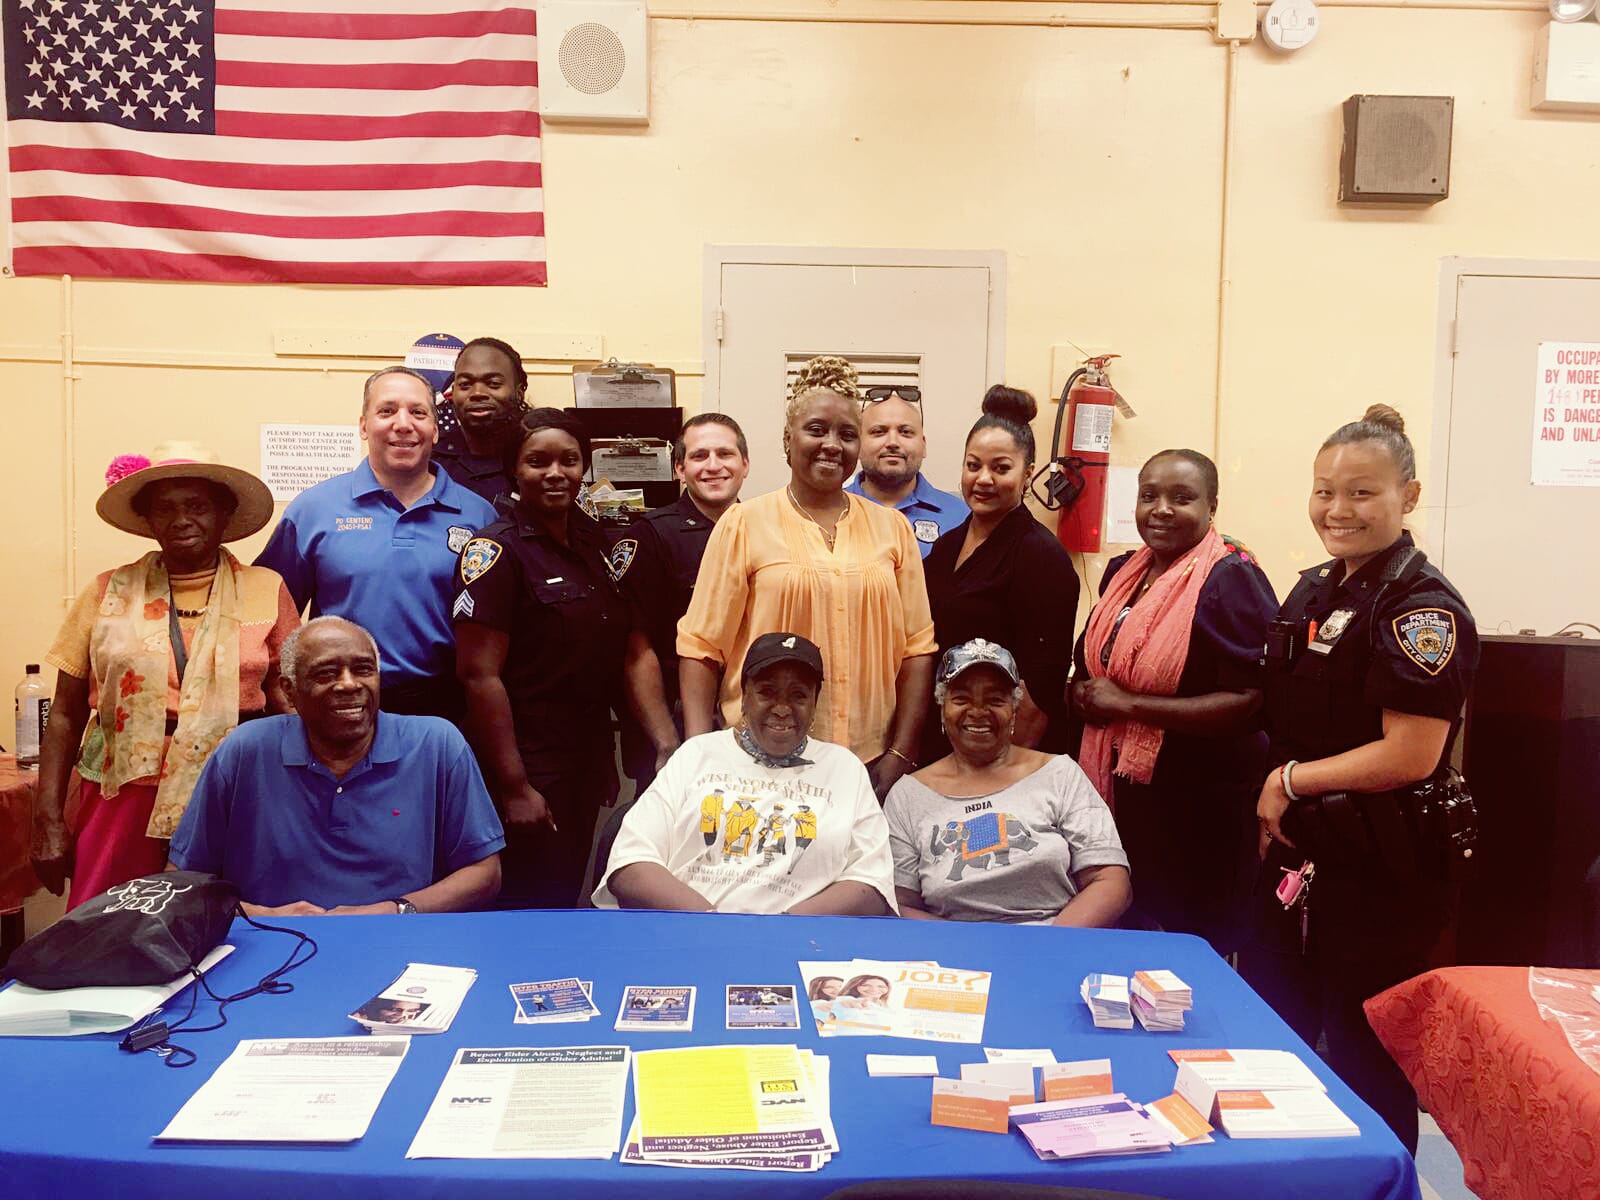 Co-hosting a workshop on Elder Abuse and Scam Alert in conjunction with the NYPD, Safe Horizon and Brooklyn DA’s Office at Glenwood Senior Center.